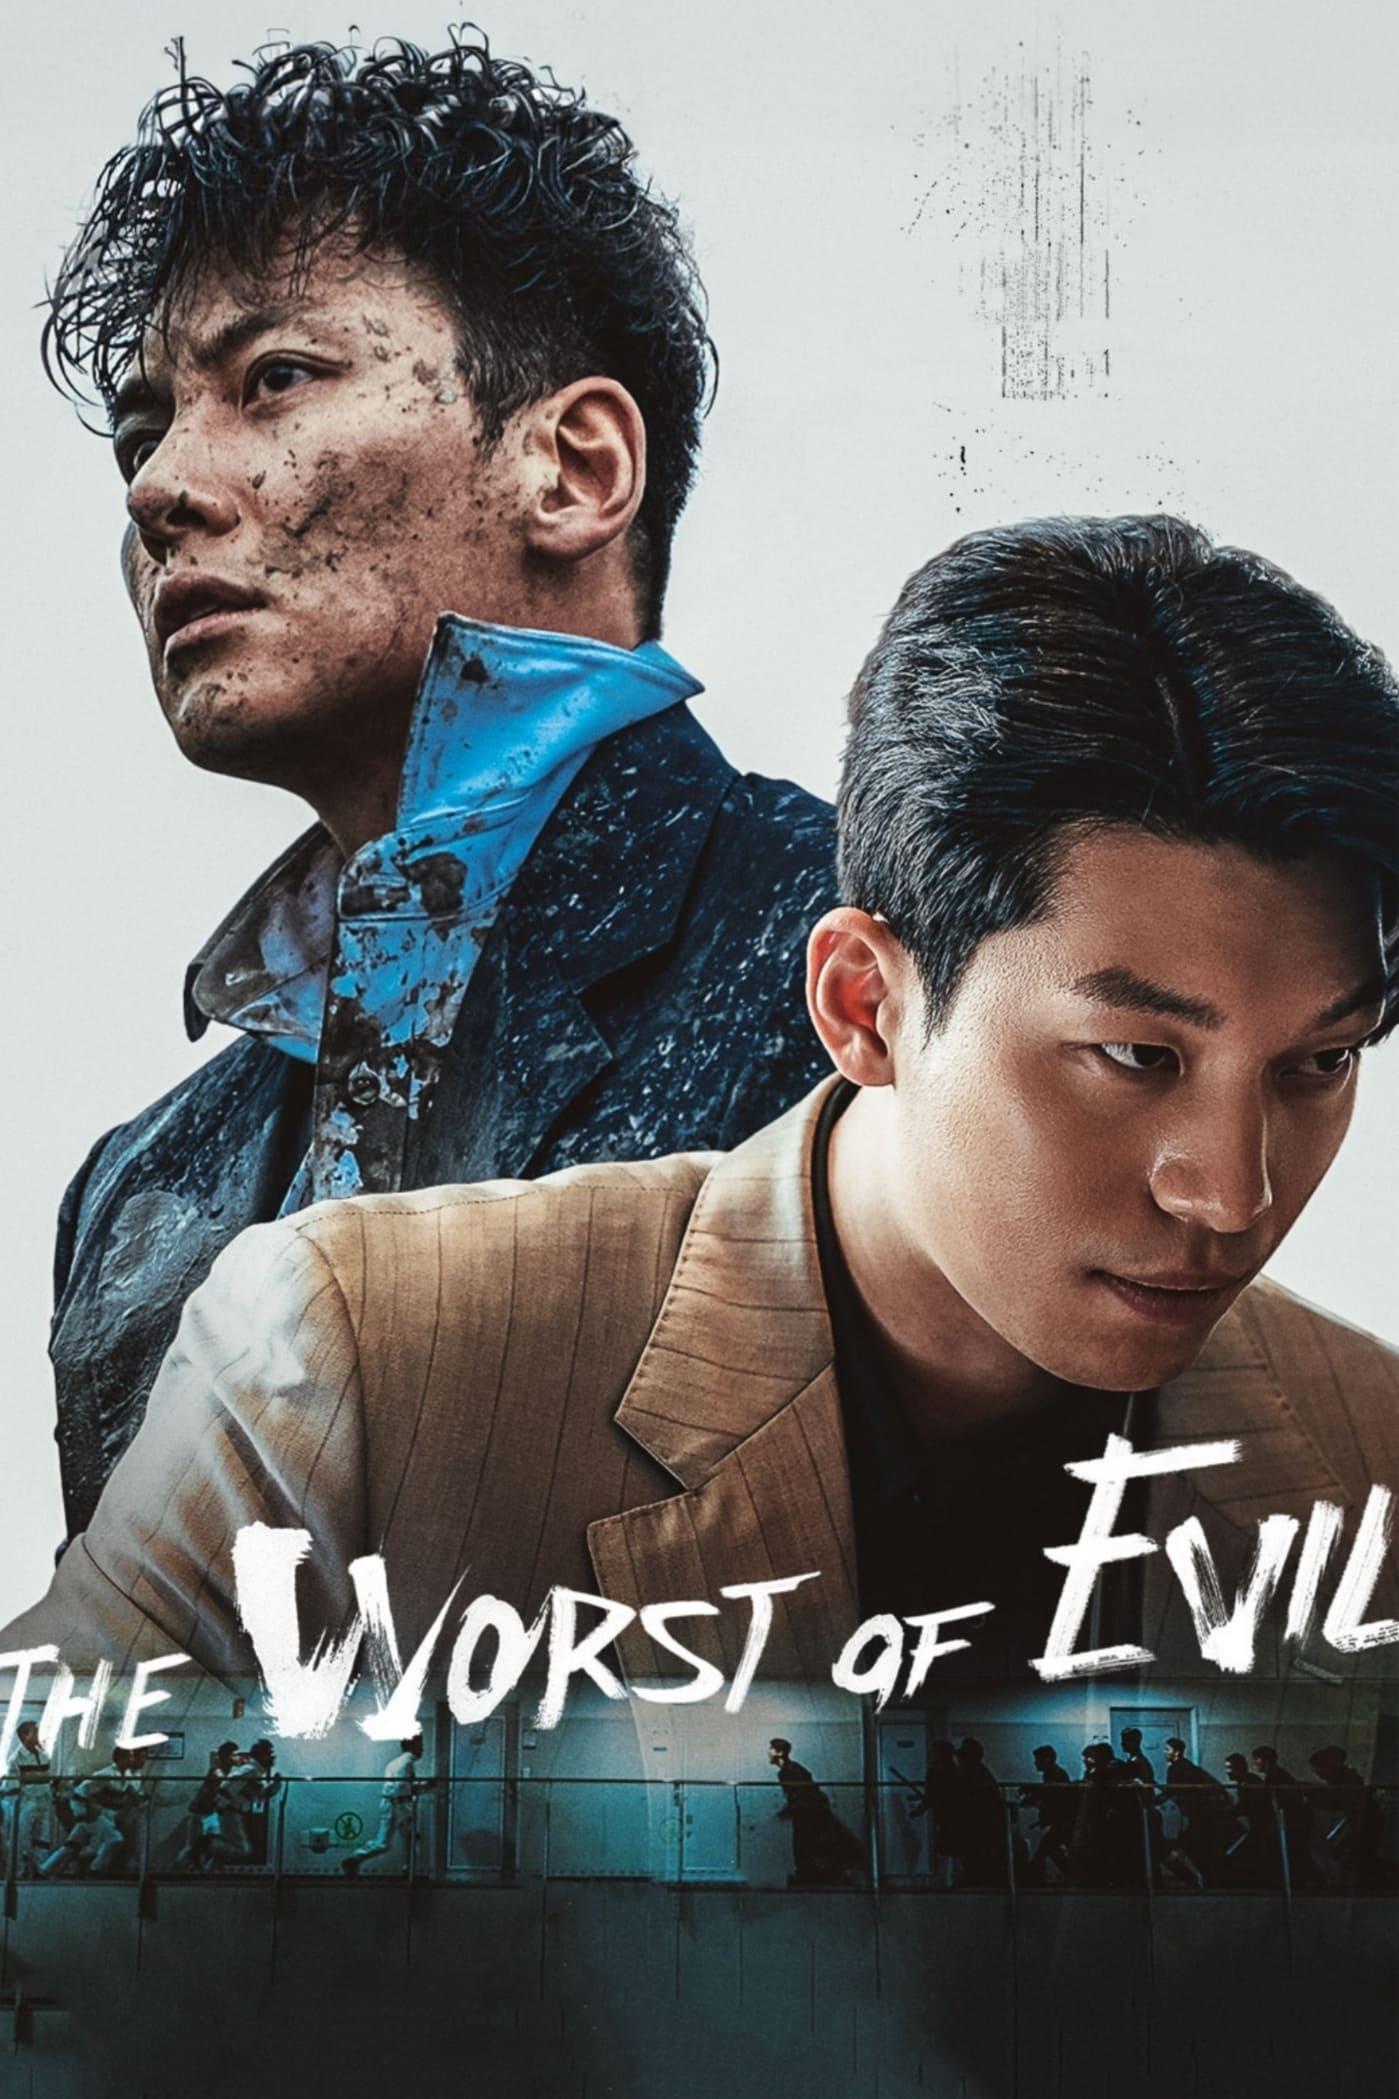 The Worst of Evil poster